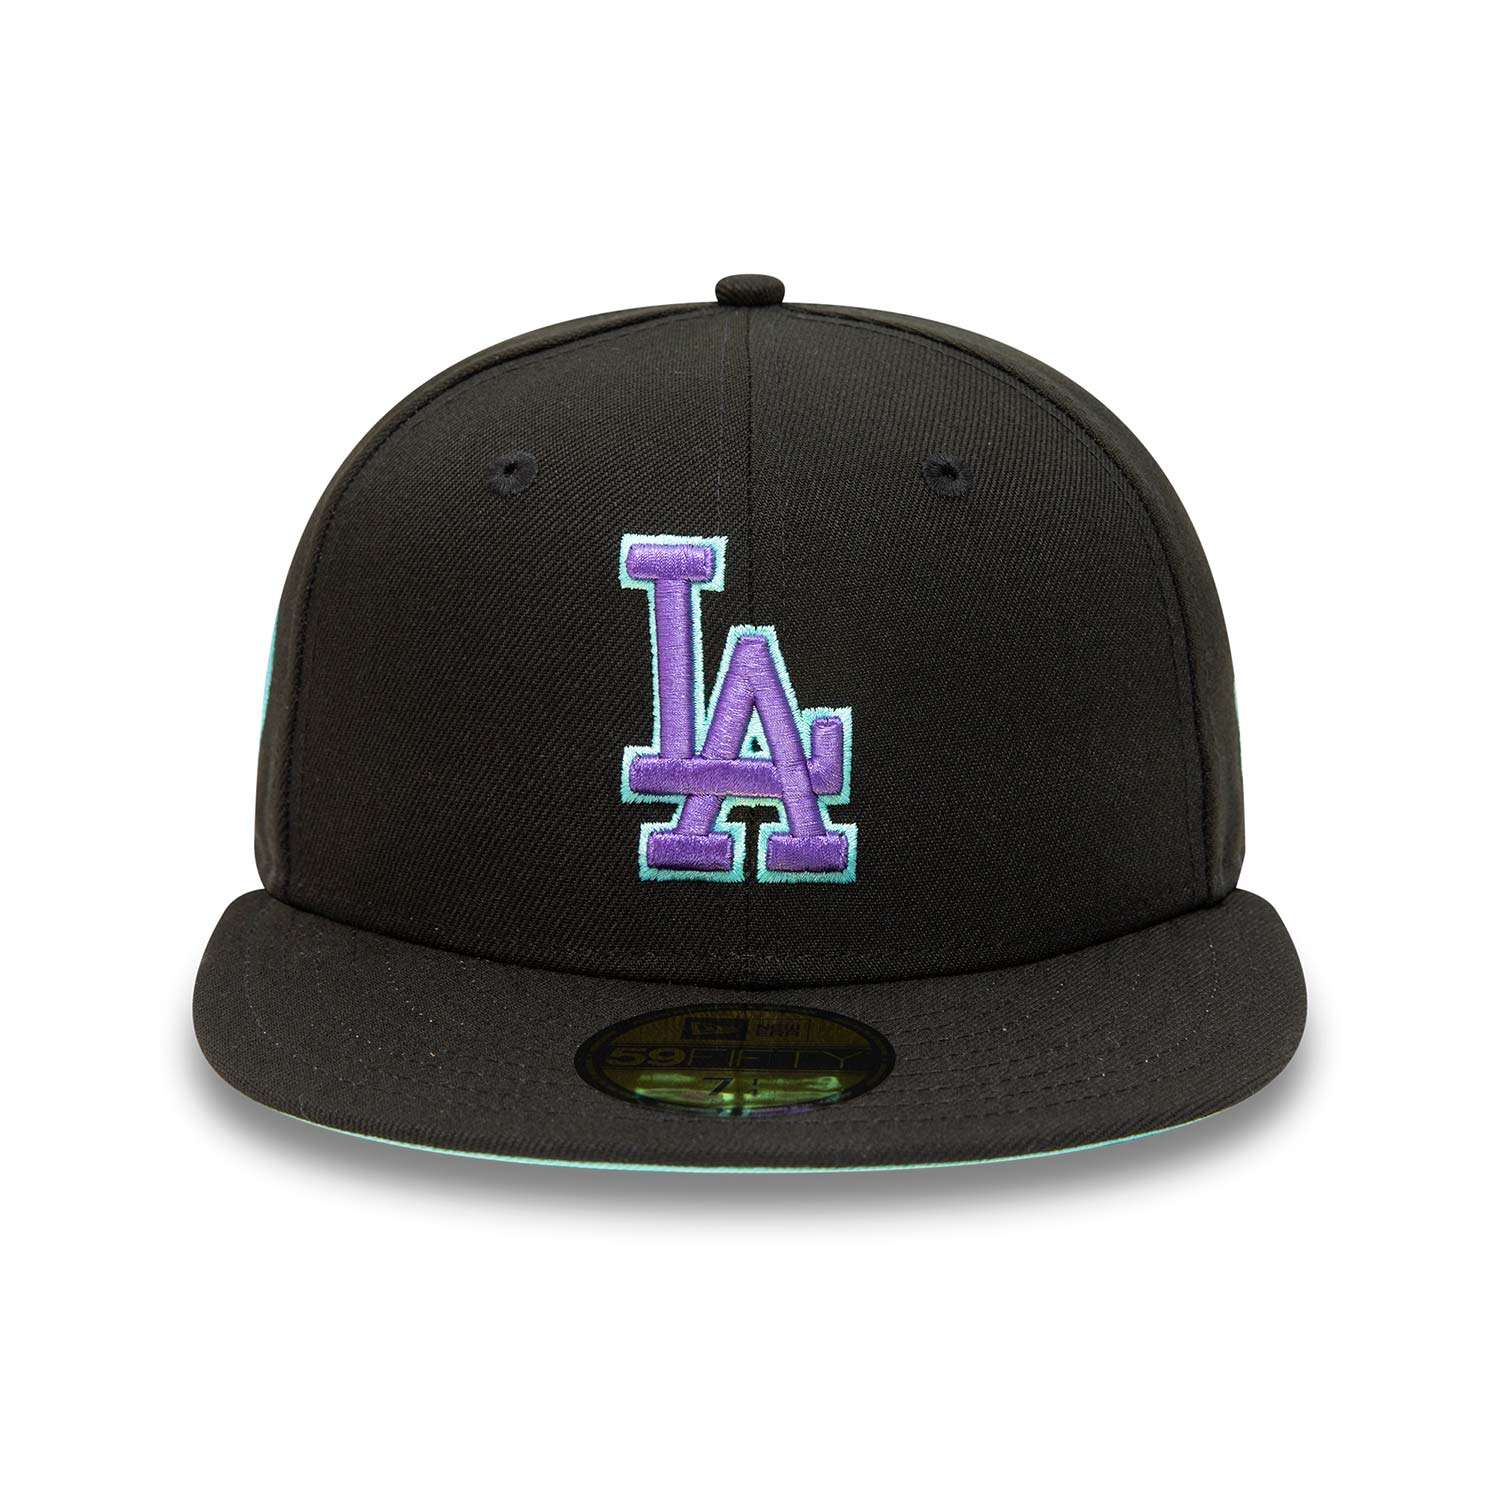 LA Dodgers Black and Blue Tint 59FIFTY Fitted Cap 59FIFTY